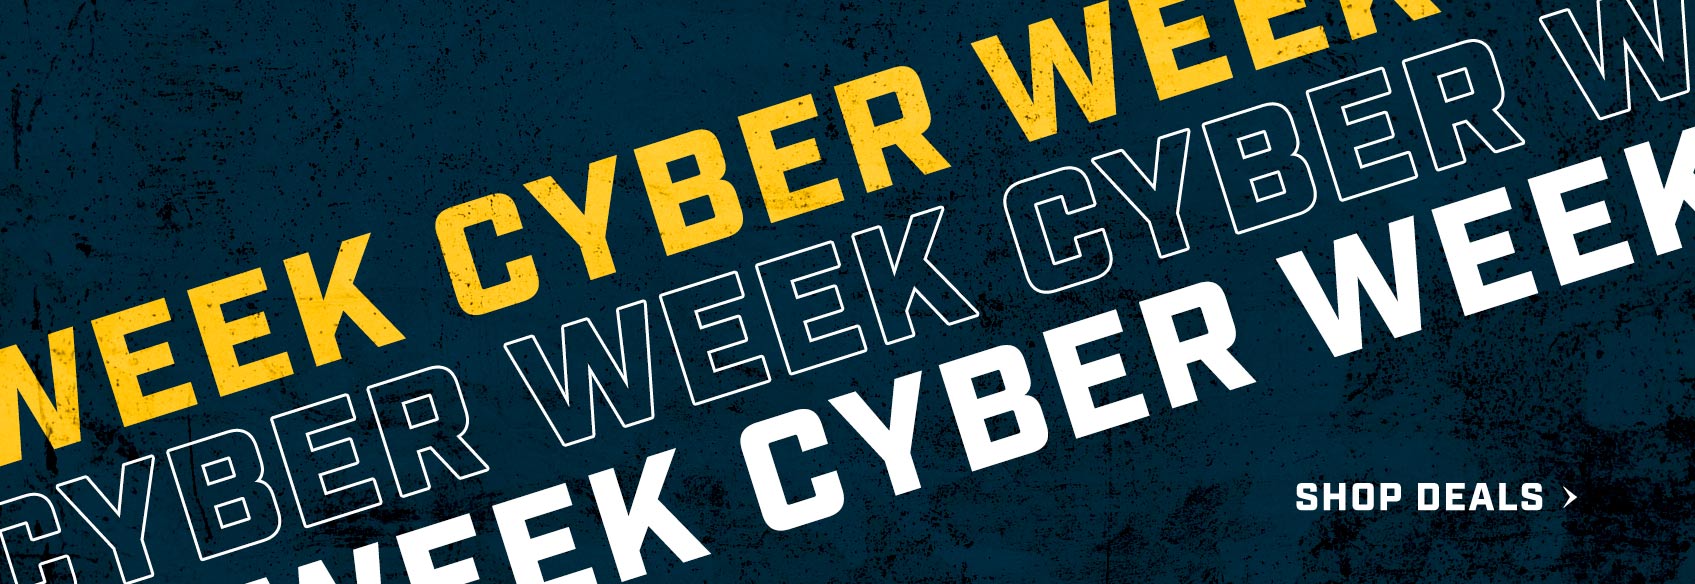 The Word Cyber Week Repeated on a Blue background